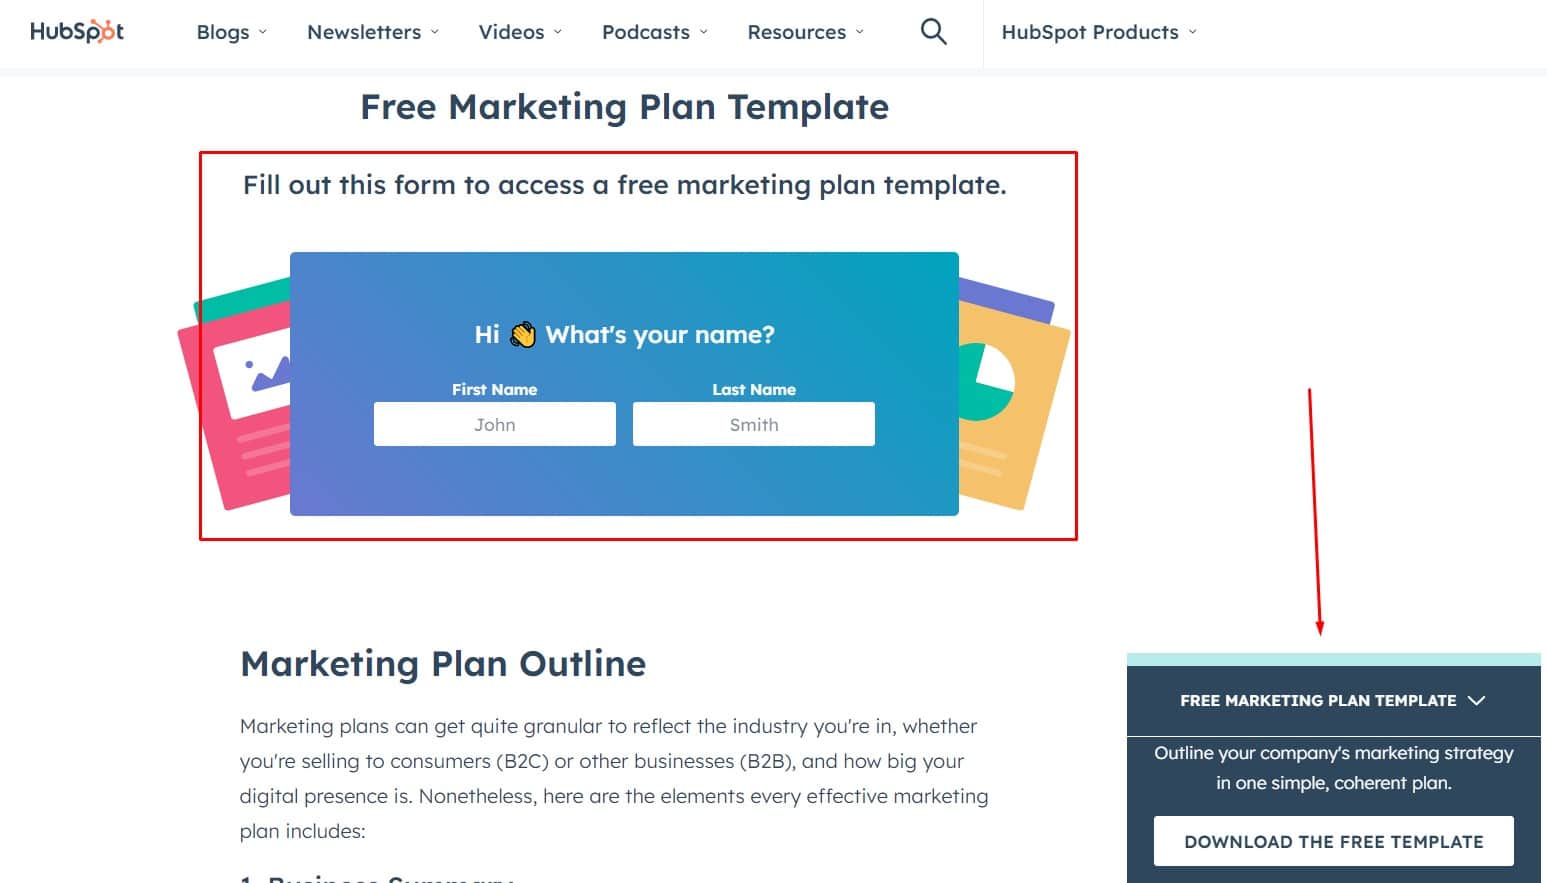 HubSpot and gated content for informational keywords